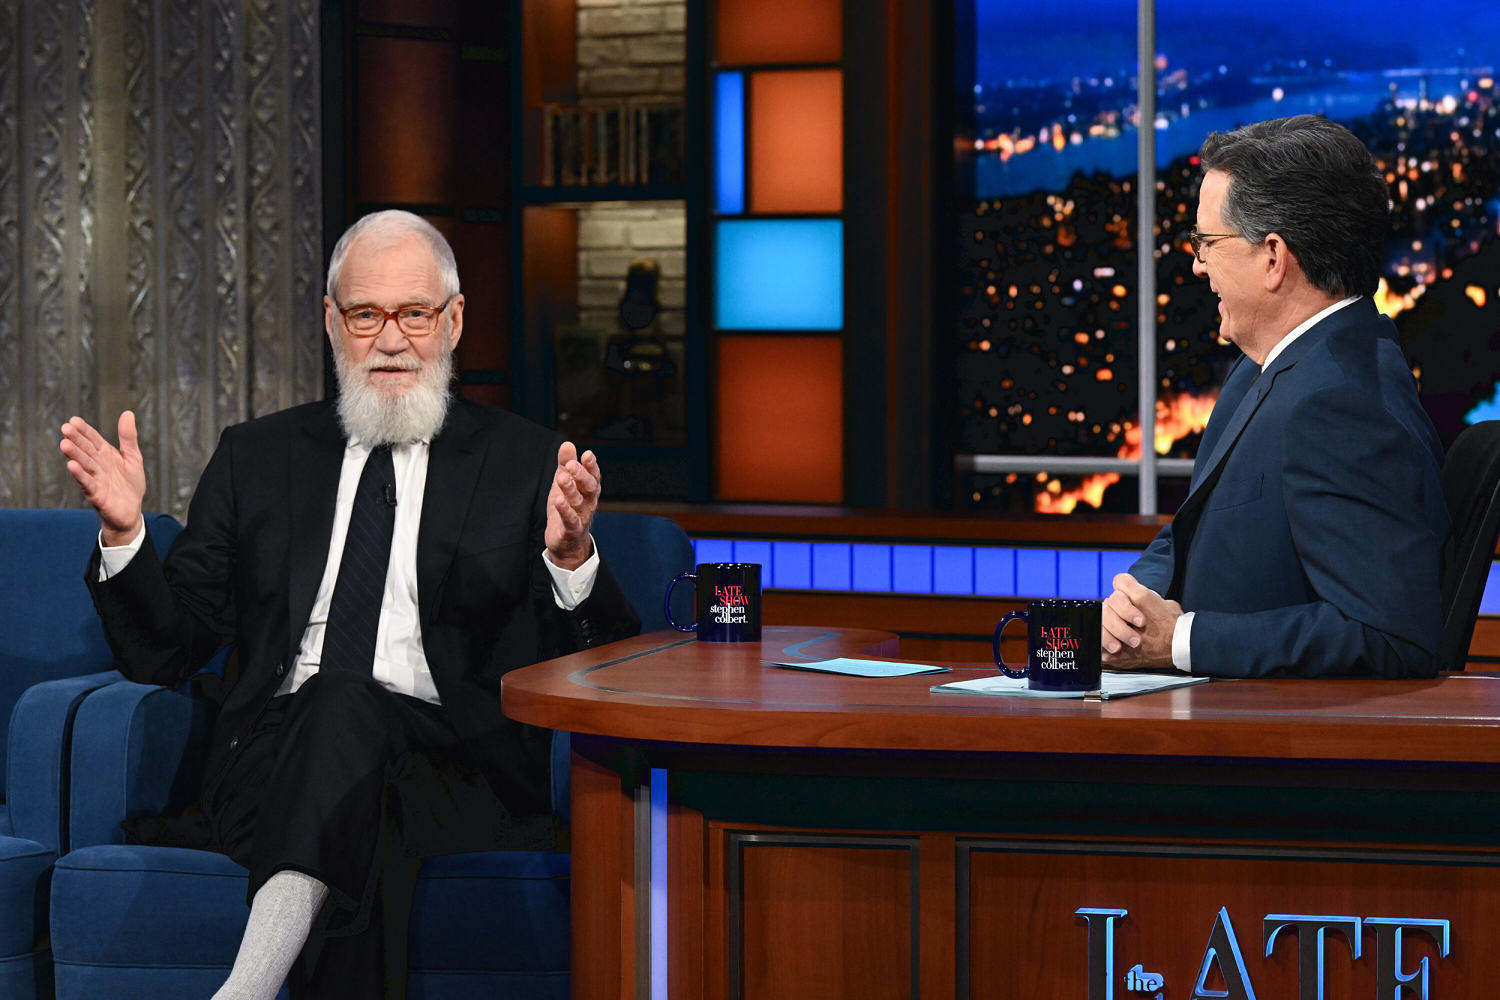 David Letterman returns to 'The Late Show'  for the first time in 8 years 